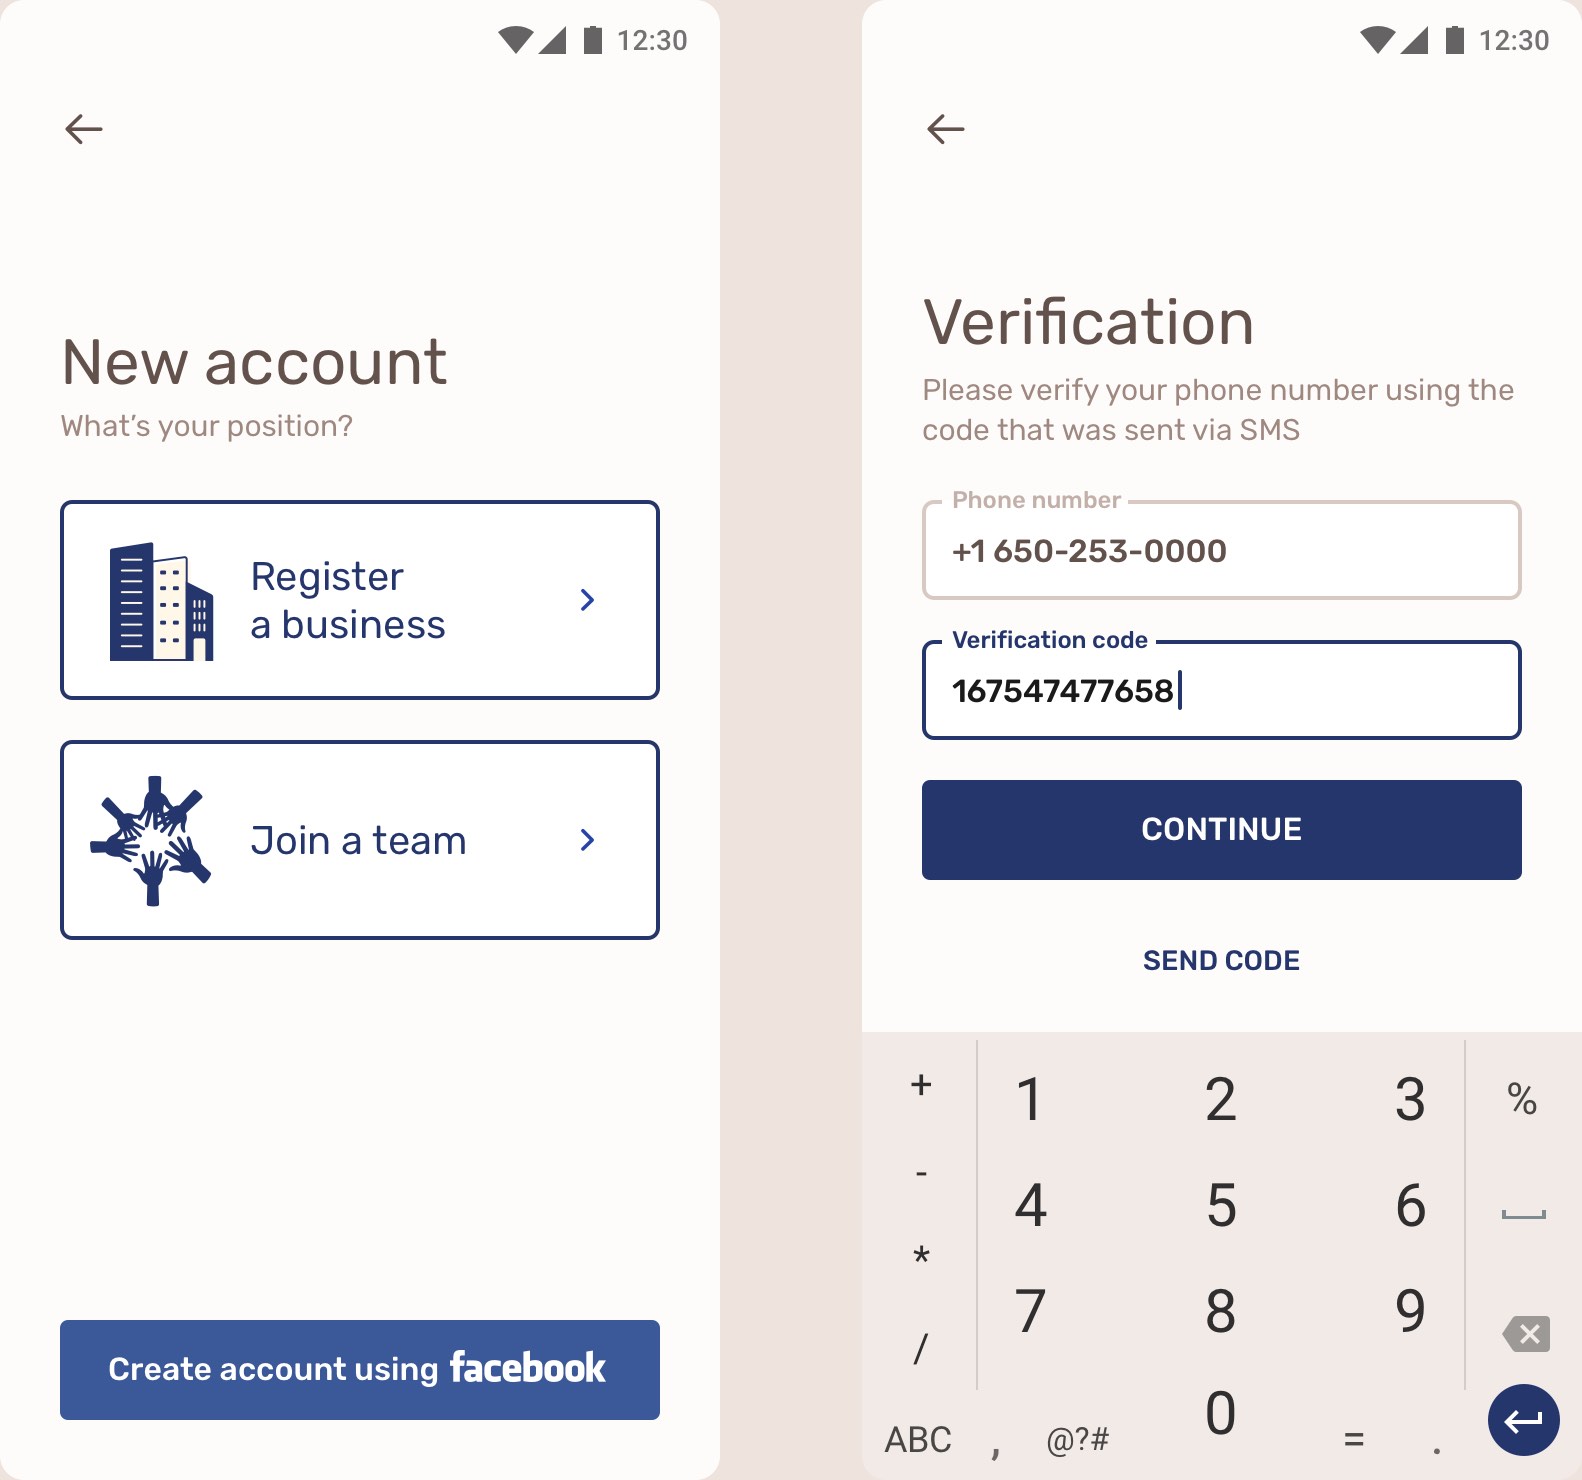 Account and verification design